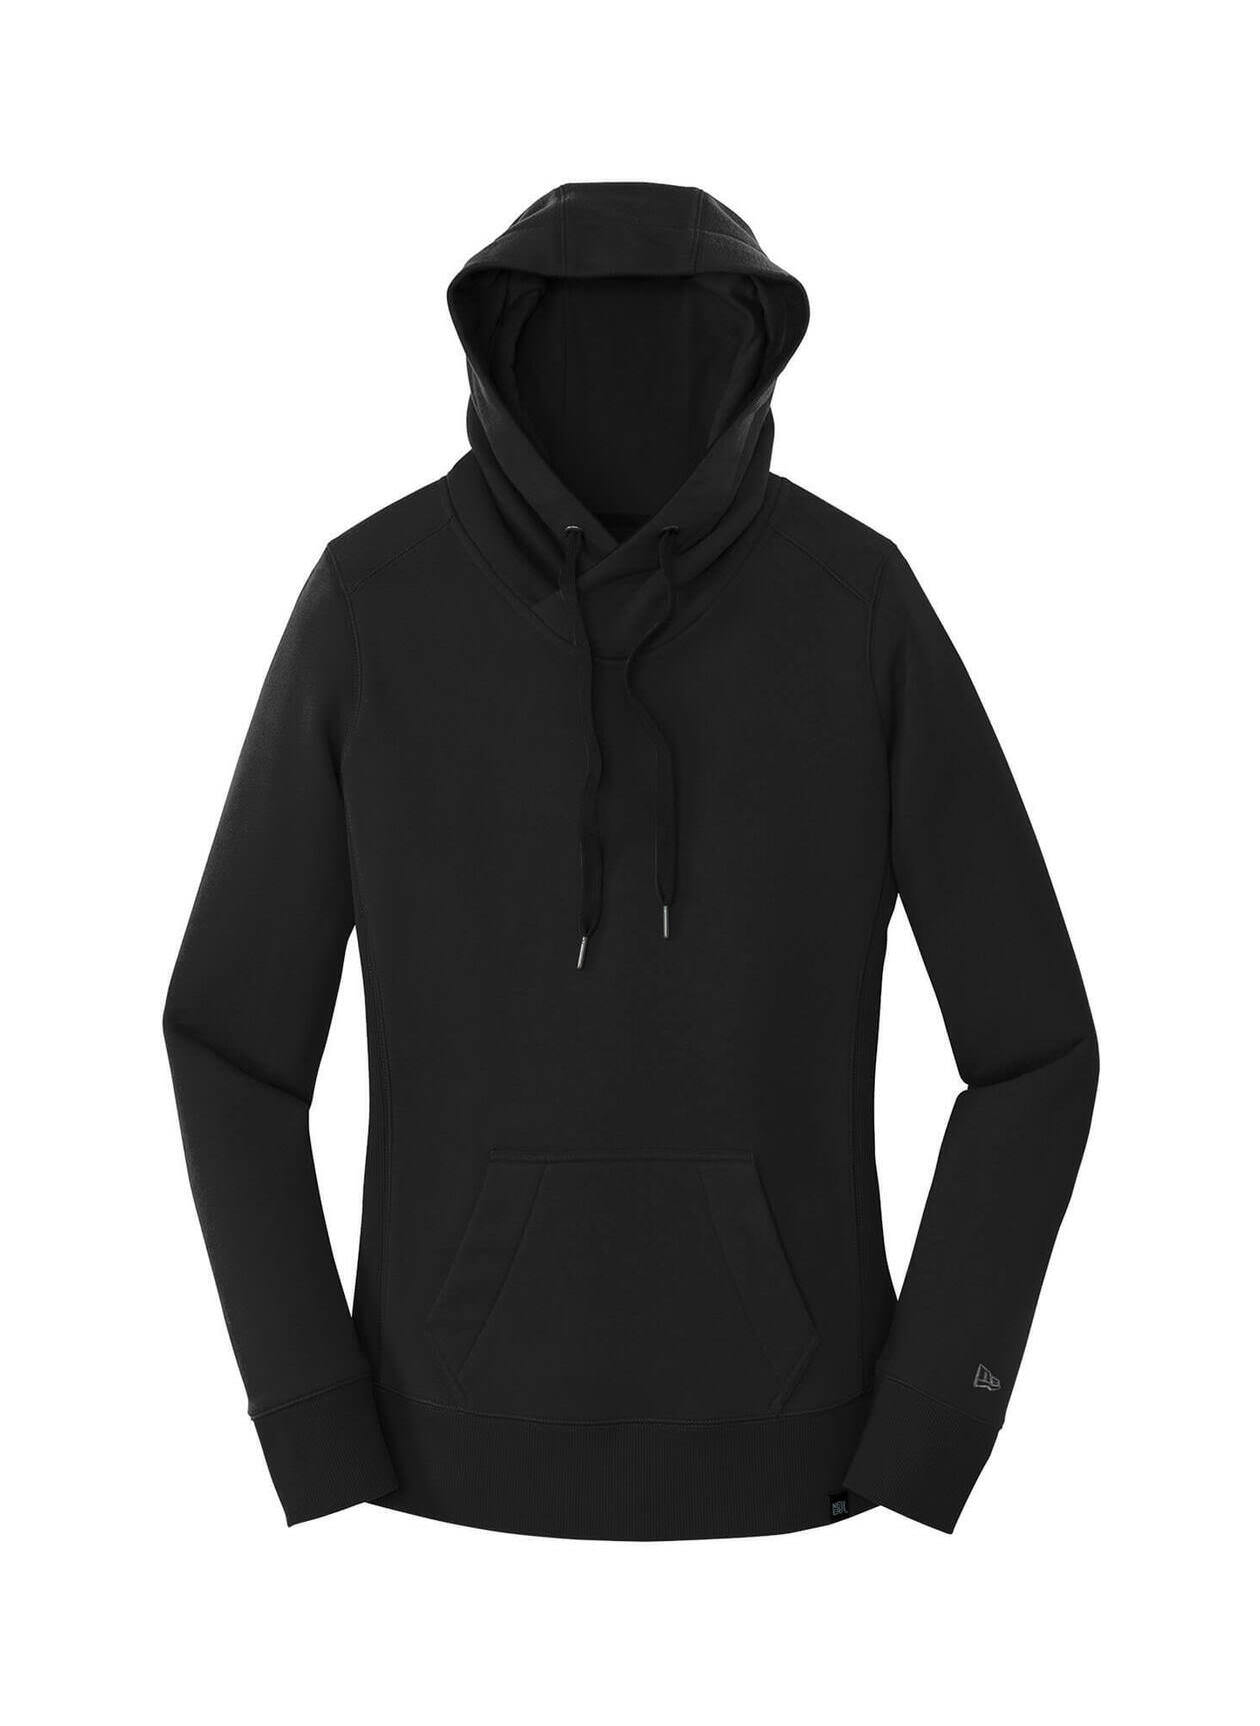 New Era Women's Black French Terry Pullover Hoodie